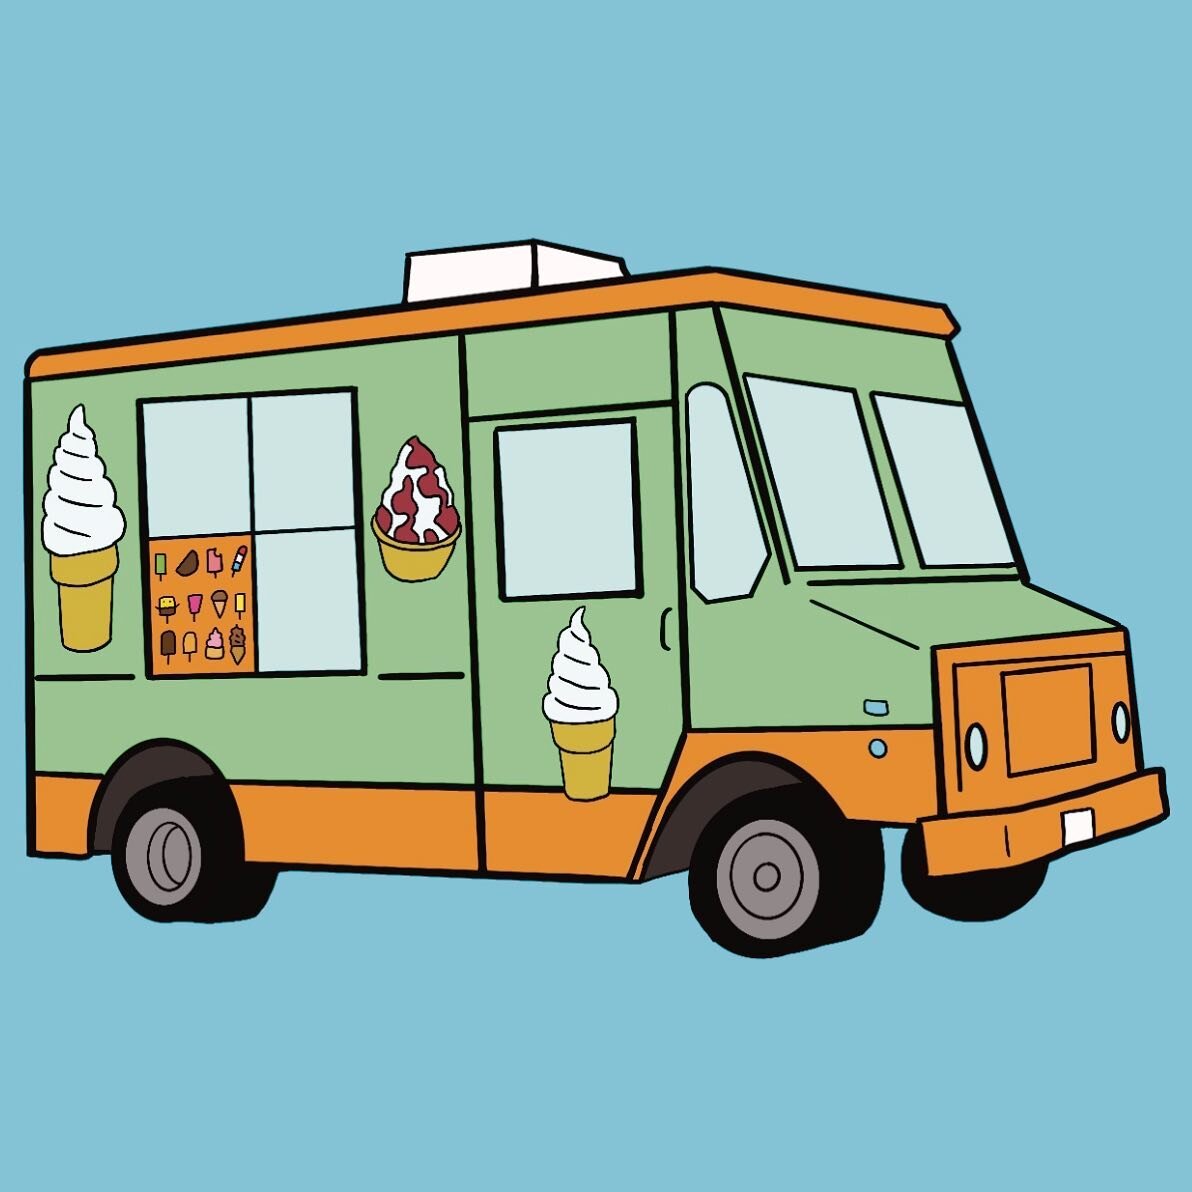 What did you get from the ice cream truck as a kid? We got an ice cream sandwich or a drumstick cone 🍦

(PS this is a sneak peak at what we&rsquo;re working on for our #nostalgia issue)

#snpmag #icecream #icecreamtruck #spongebobicecream #strawberr